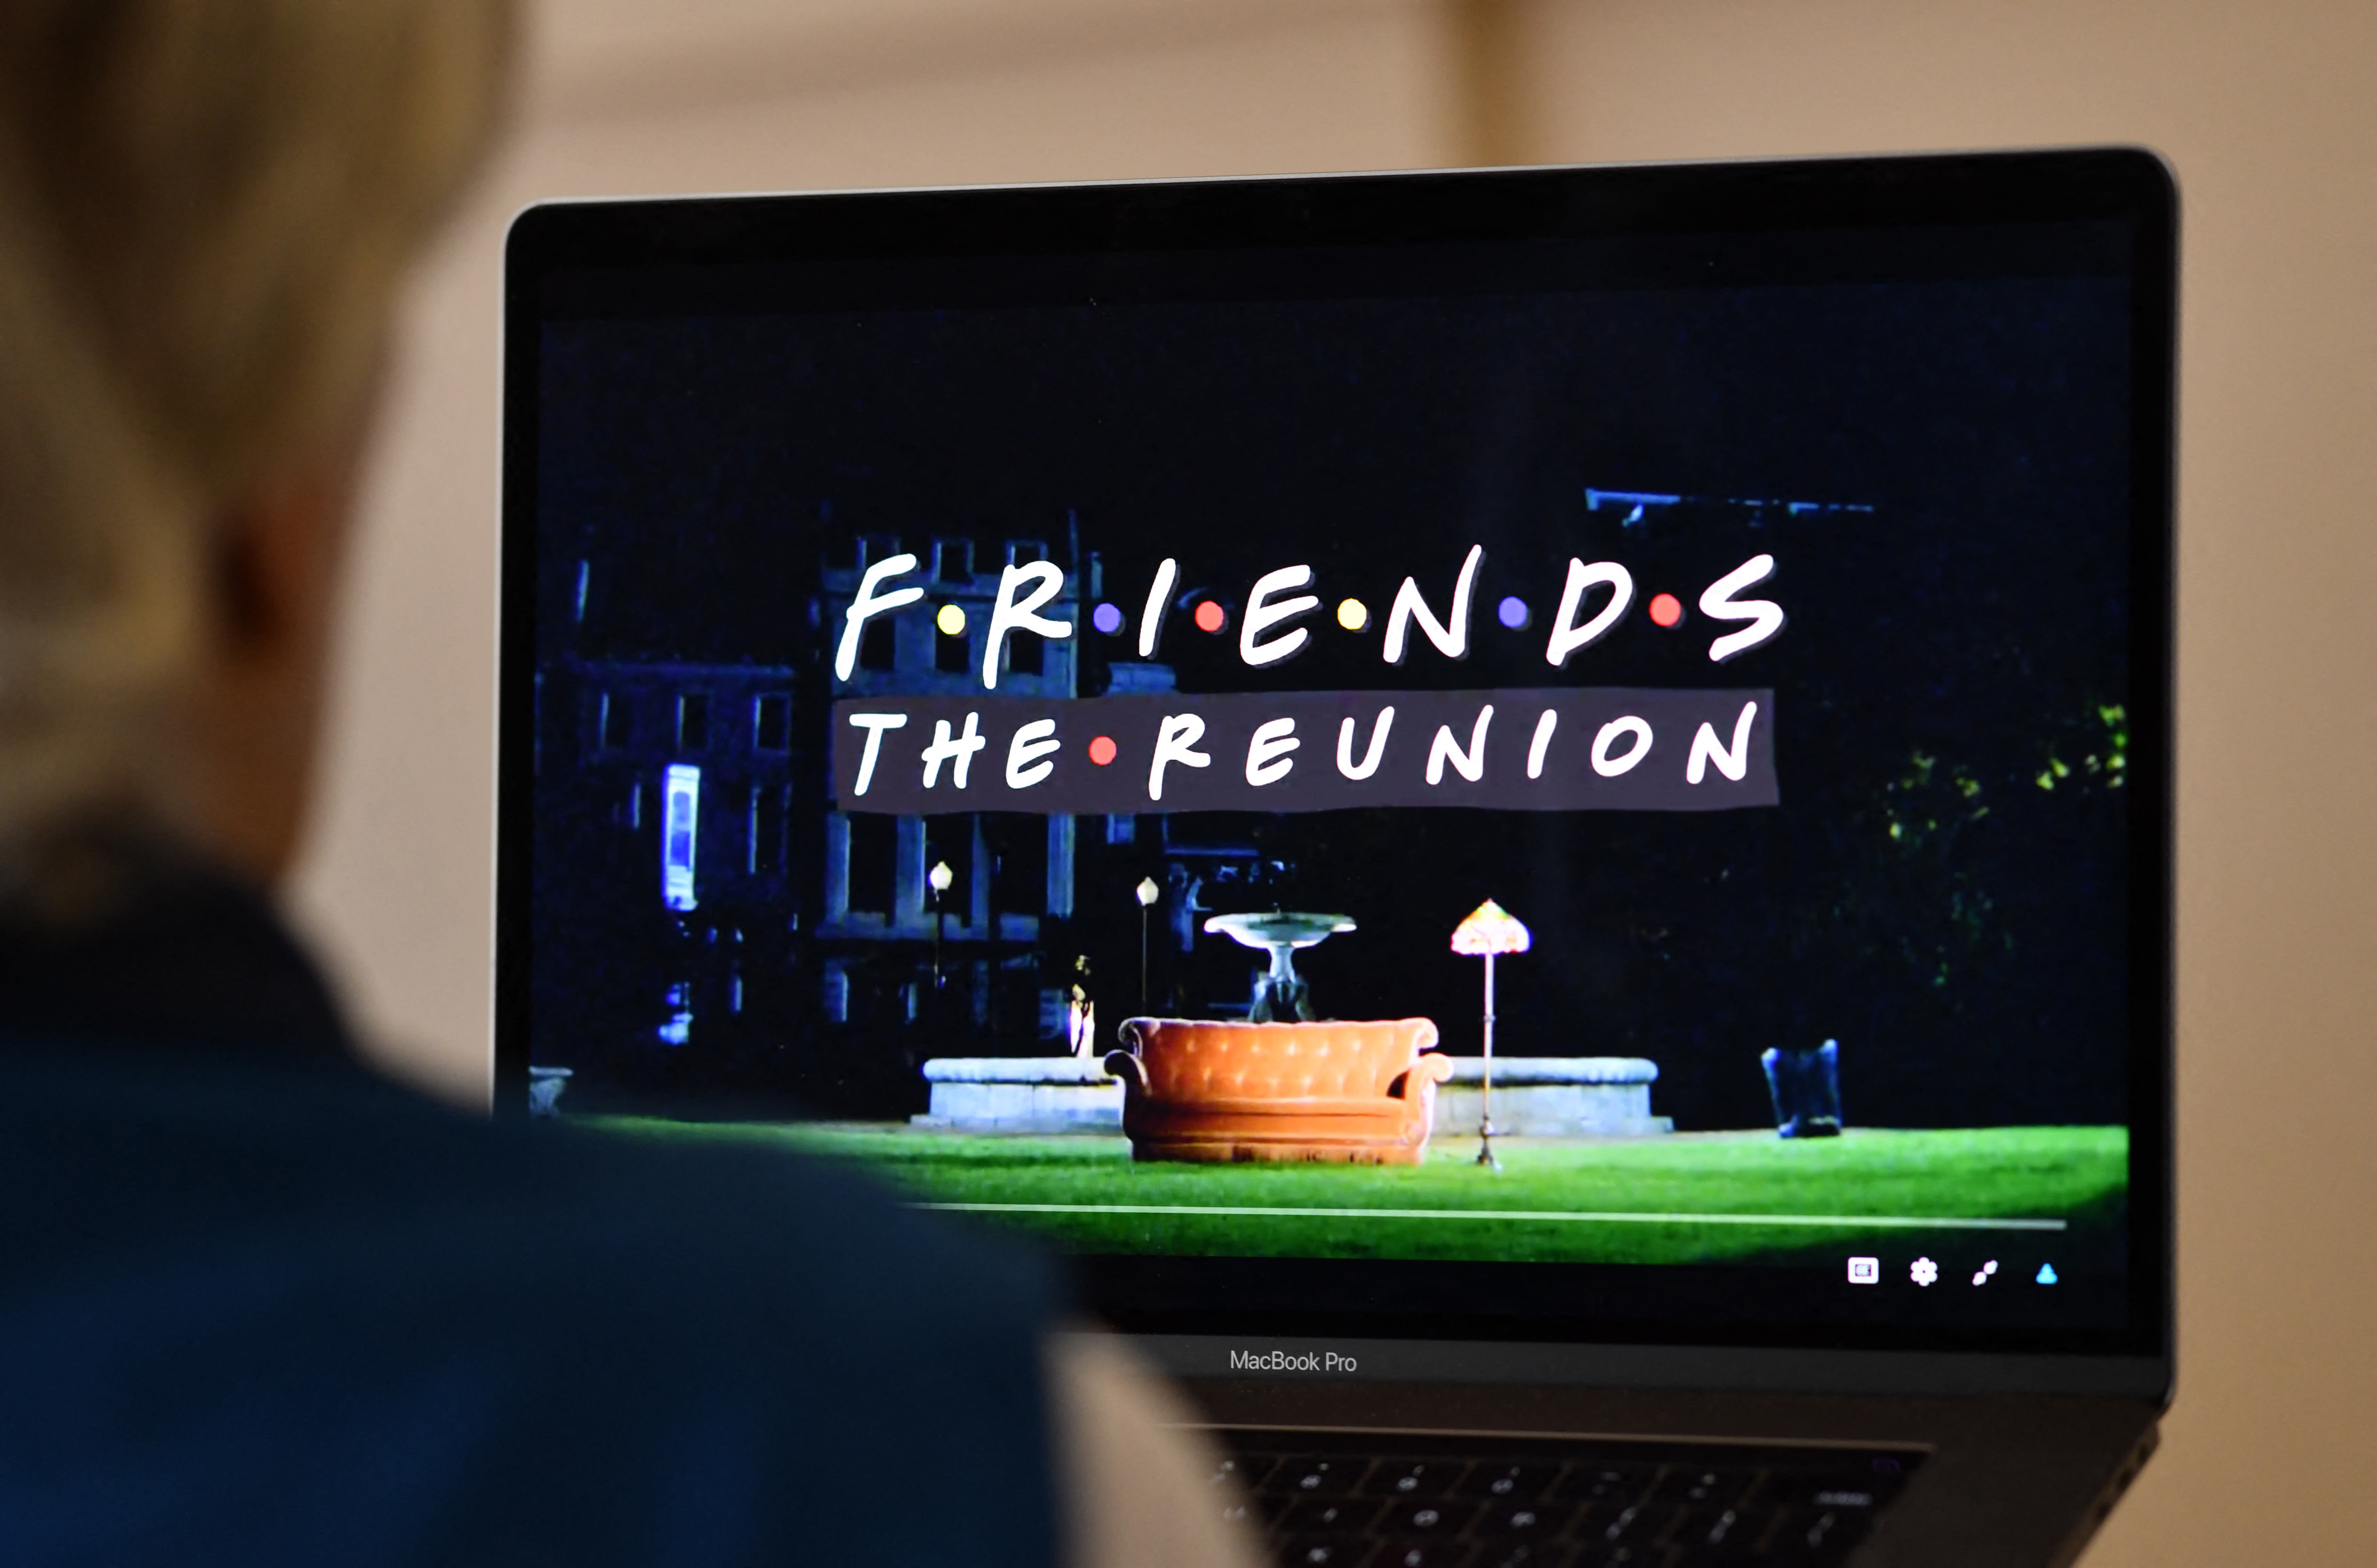 Last year, the much anticipated “Friends” reunion episode was missing cameos from Lady Gaga, Justin Bieber and BTS when it aired in China because those celebrities had at some point offended the country’s leaders.